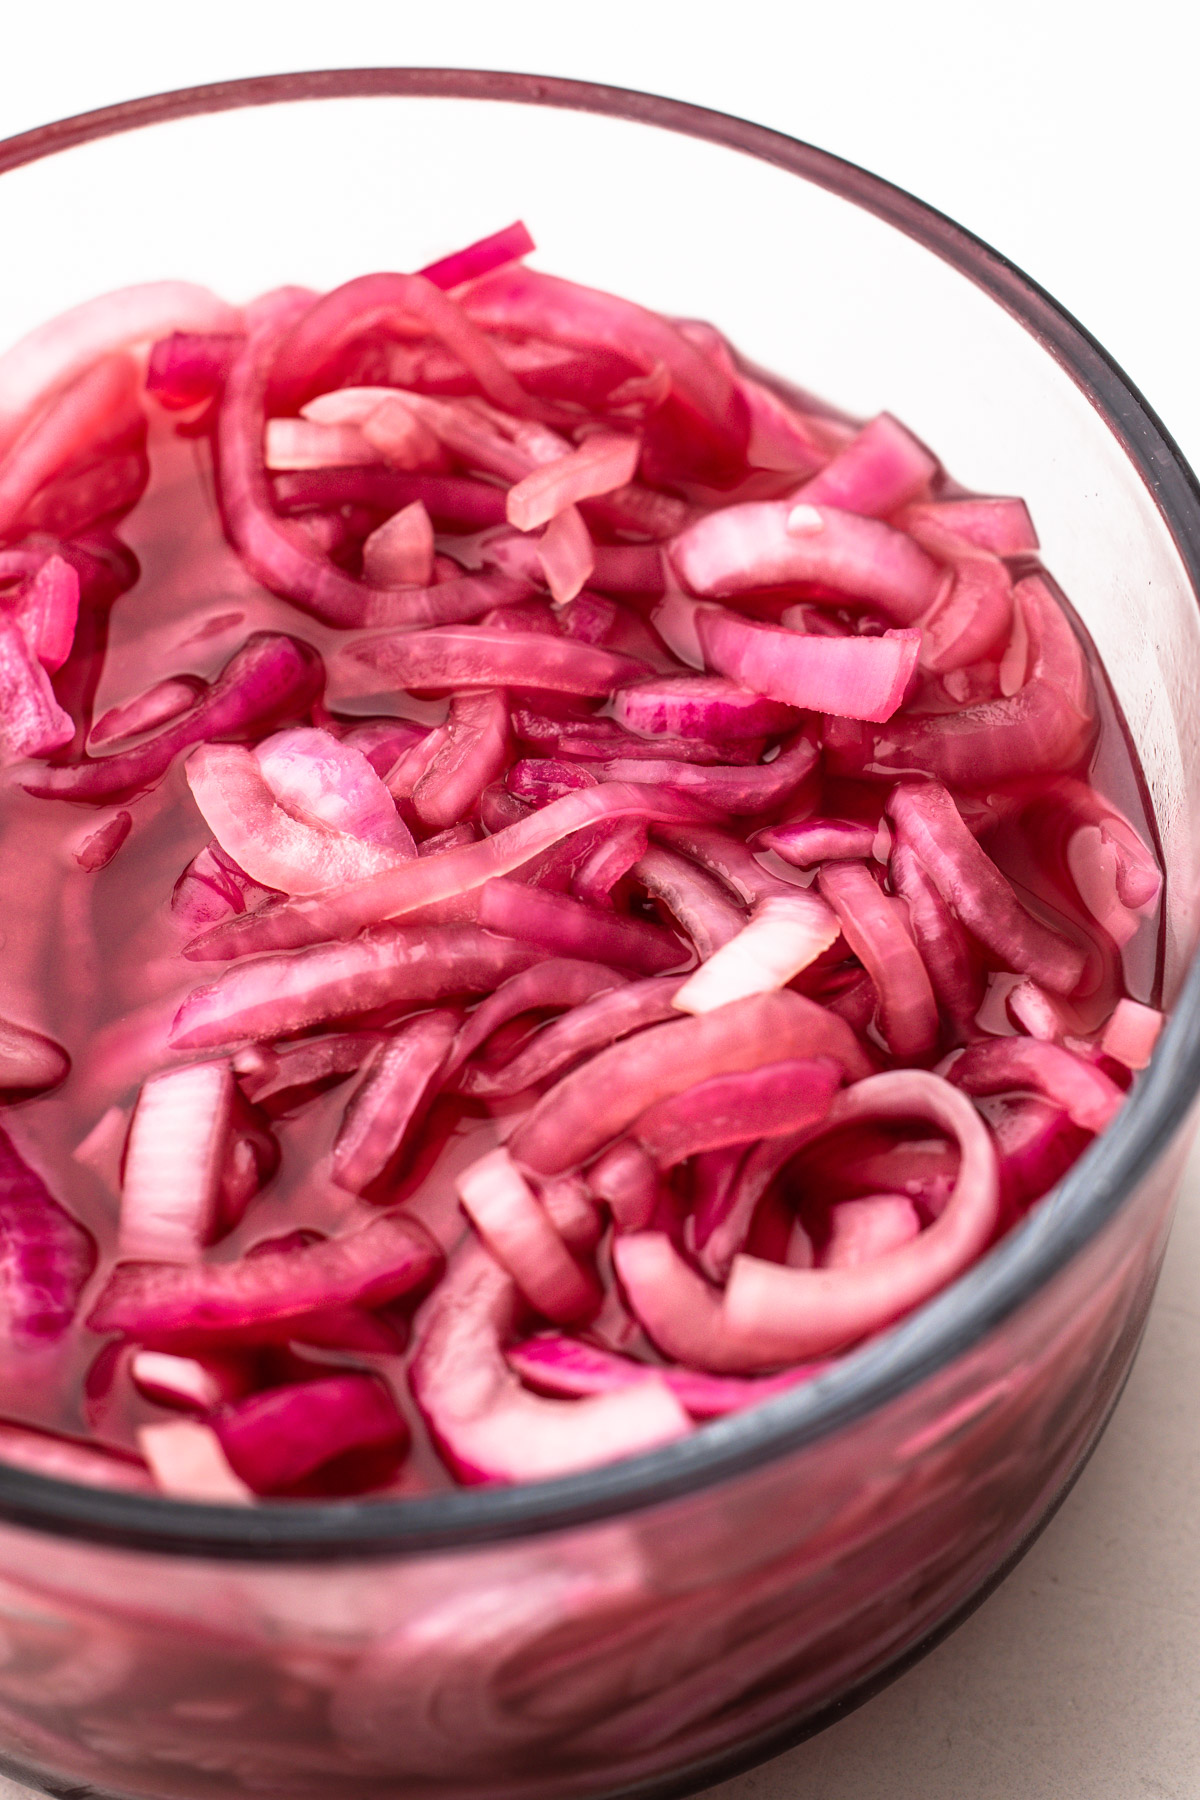 https://everydayfamilyeats.com/wp-content/uploads/2023/07/Pickled-Red-Onions-10.jpg